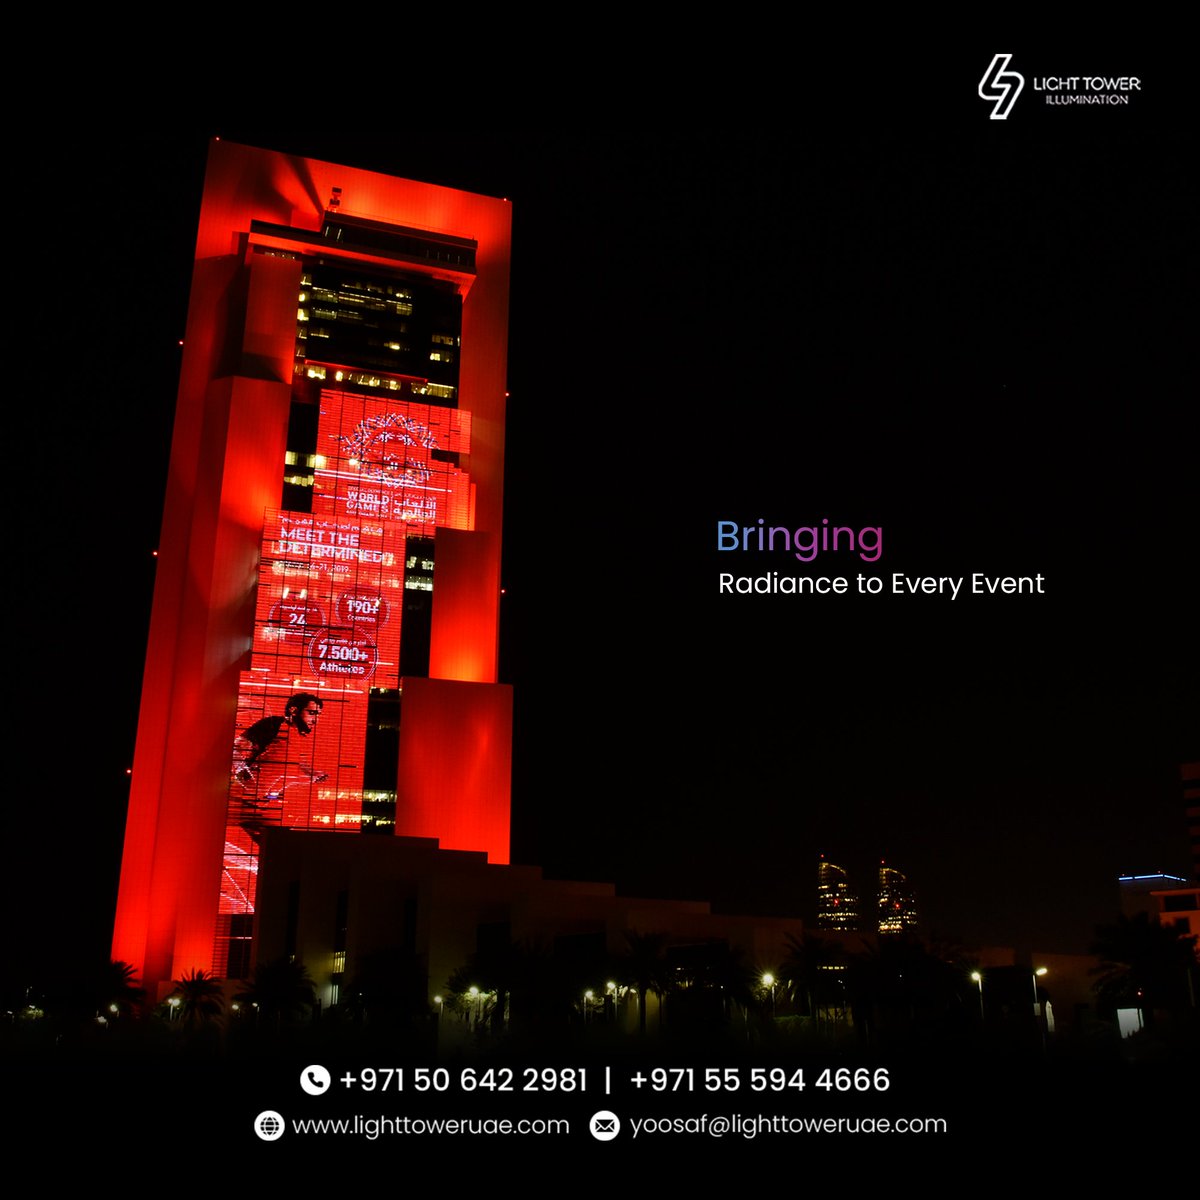 Bringing Radiance to Every Event

Connect with us: +971 50 642 2981, +971 55 594 4666

#lighting #facadelighting #outdoorlights #eventlighting #outdoorlighting